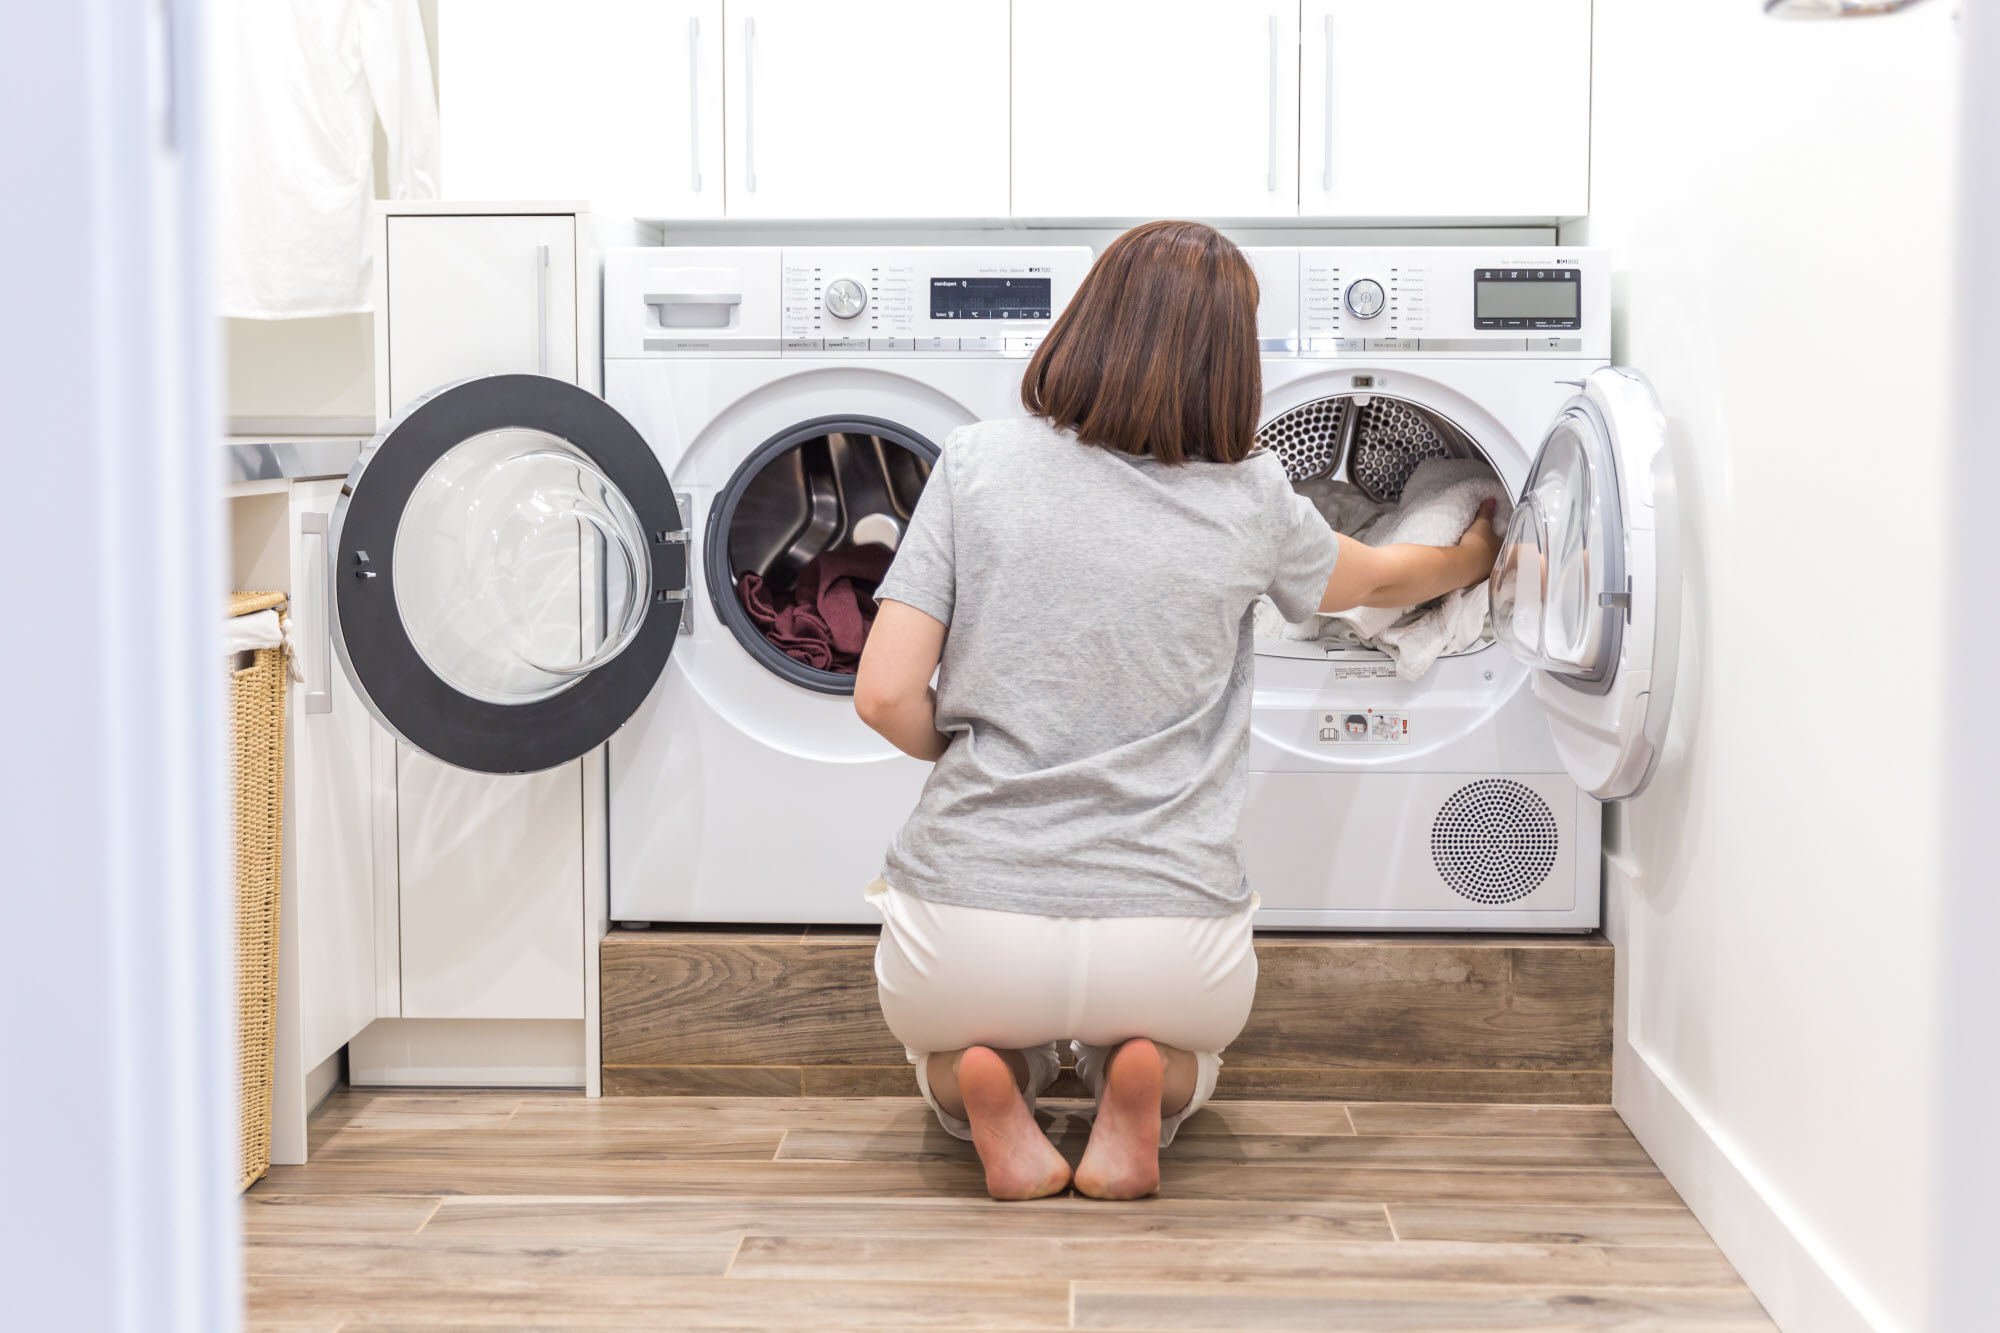 Dryer not drying clothes? Could be fabric softener